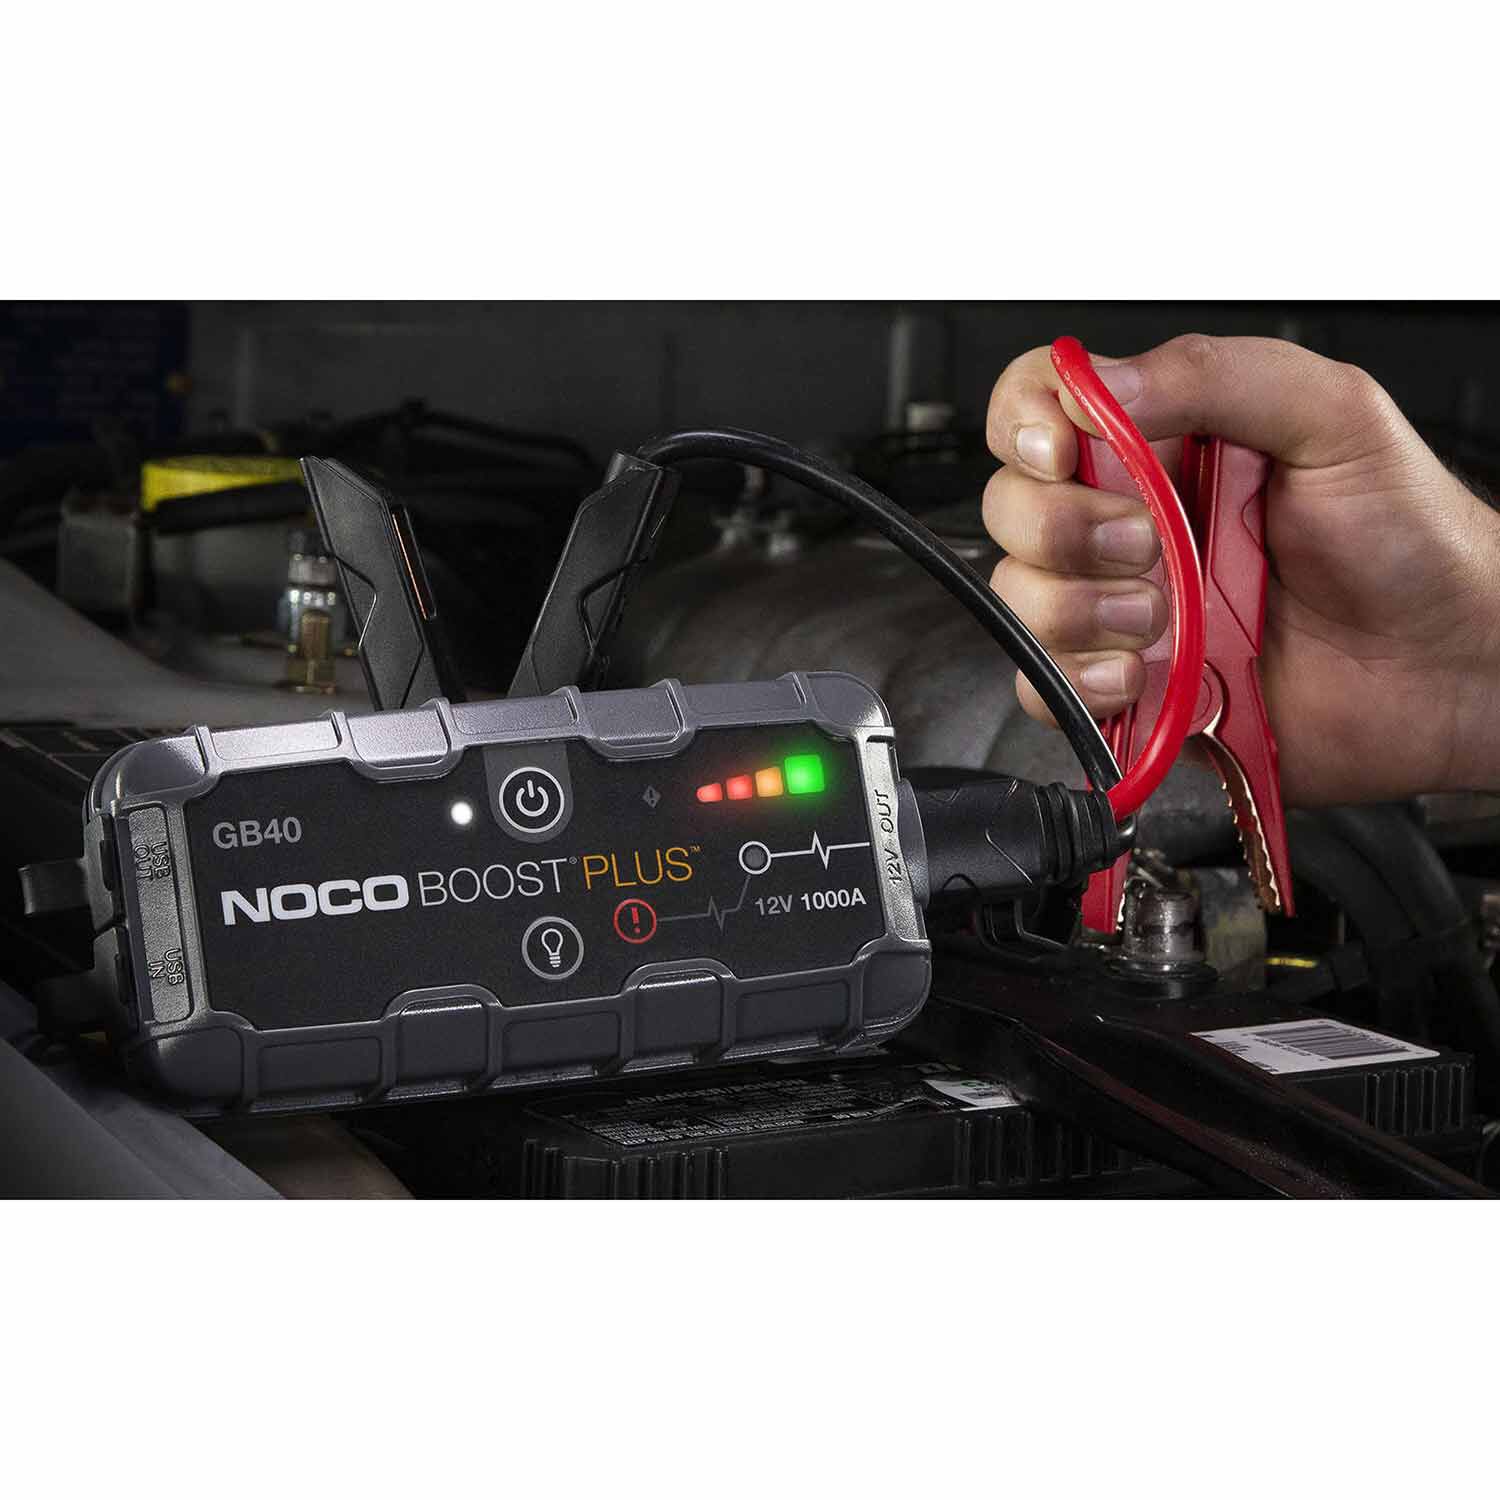 NOCO Genius Boost Sport GB40 12V UltraSafe Lithium Jump Starter Device with Case 